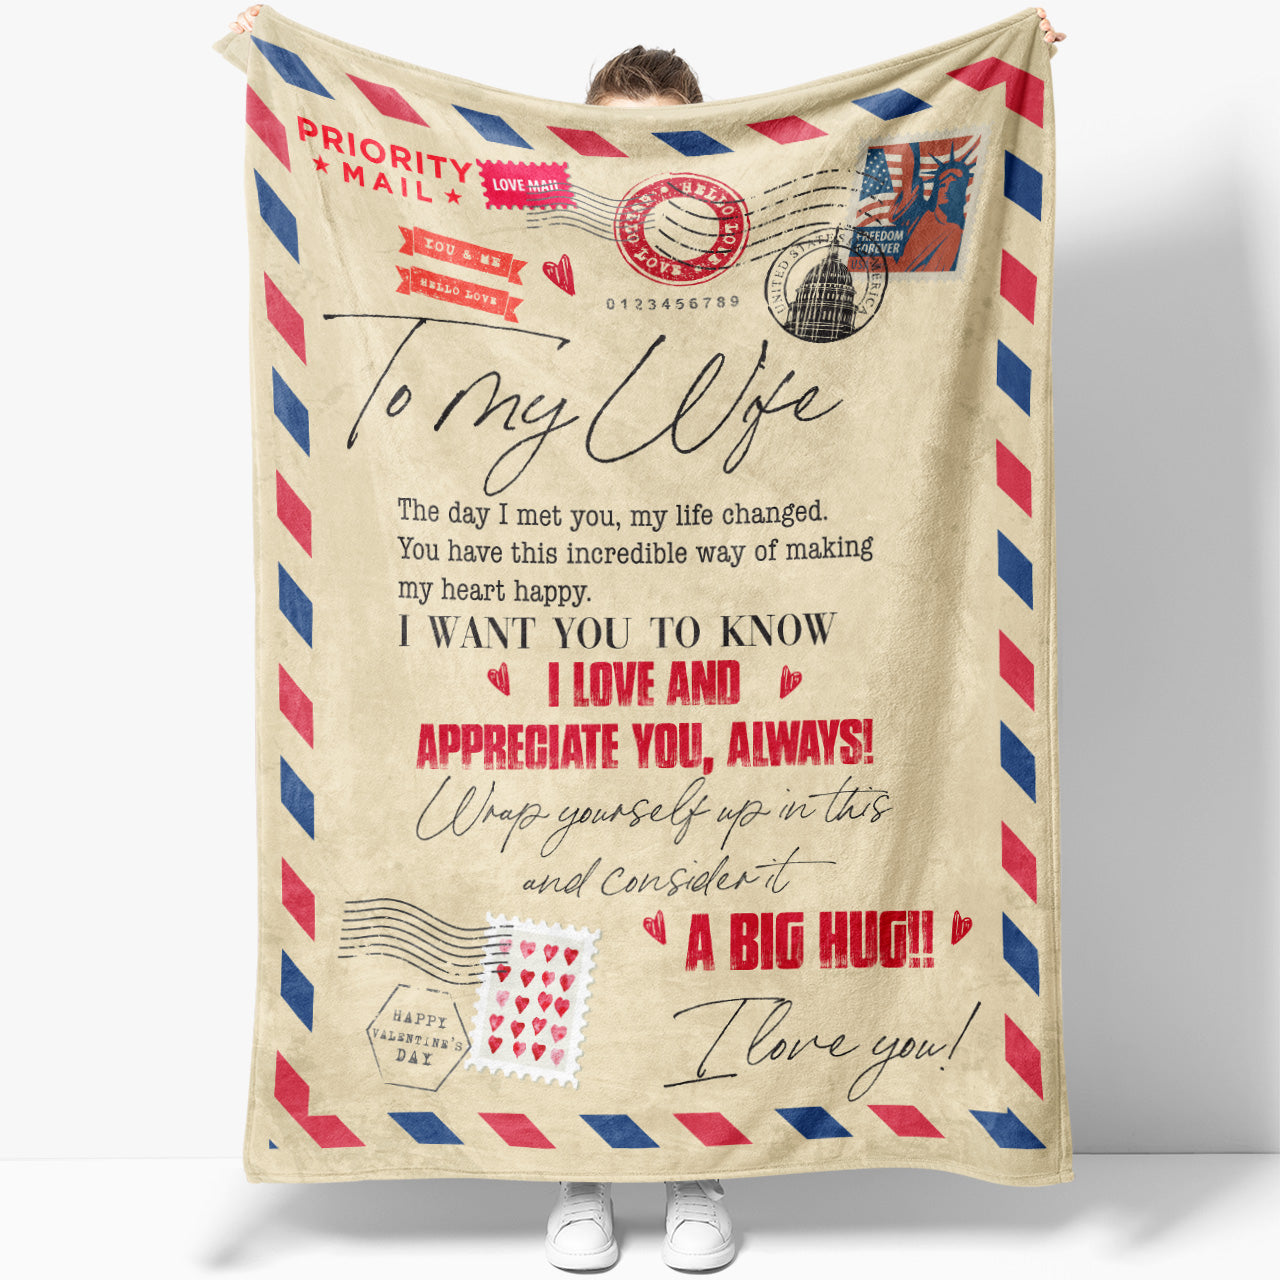 Blanket Gift For Her, Gift Ideas For Women, Romantic Gift For Wife, The Day I Met You